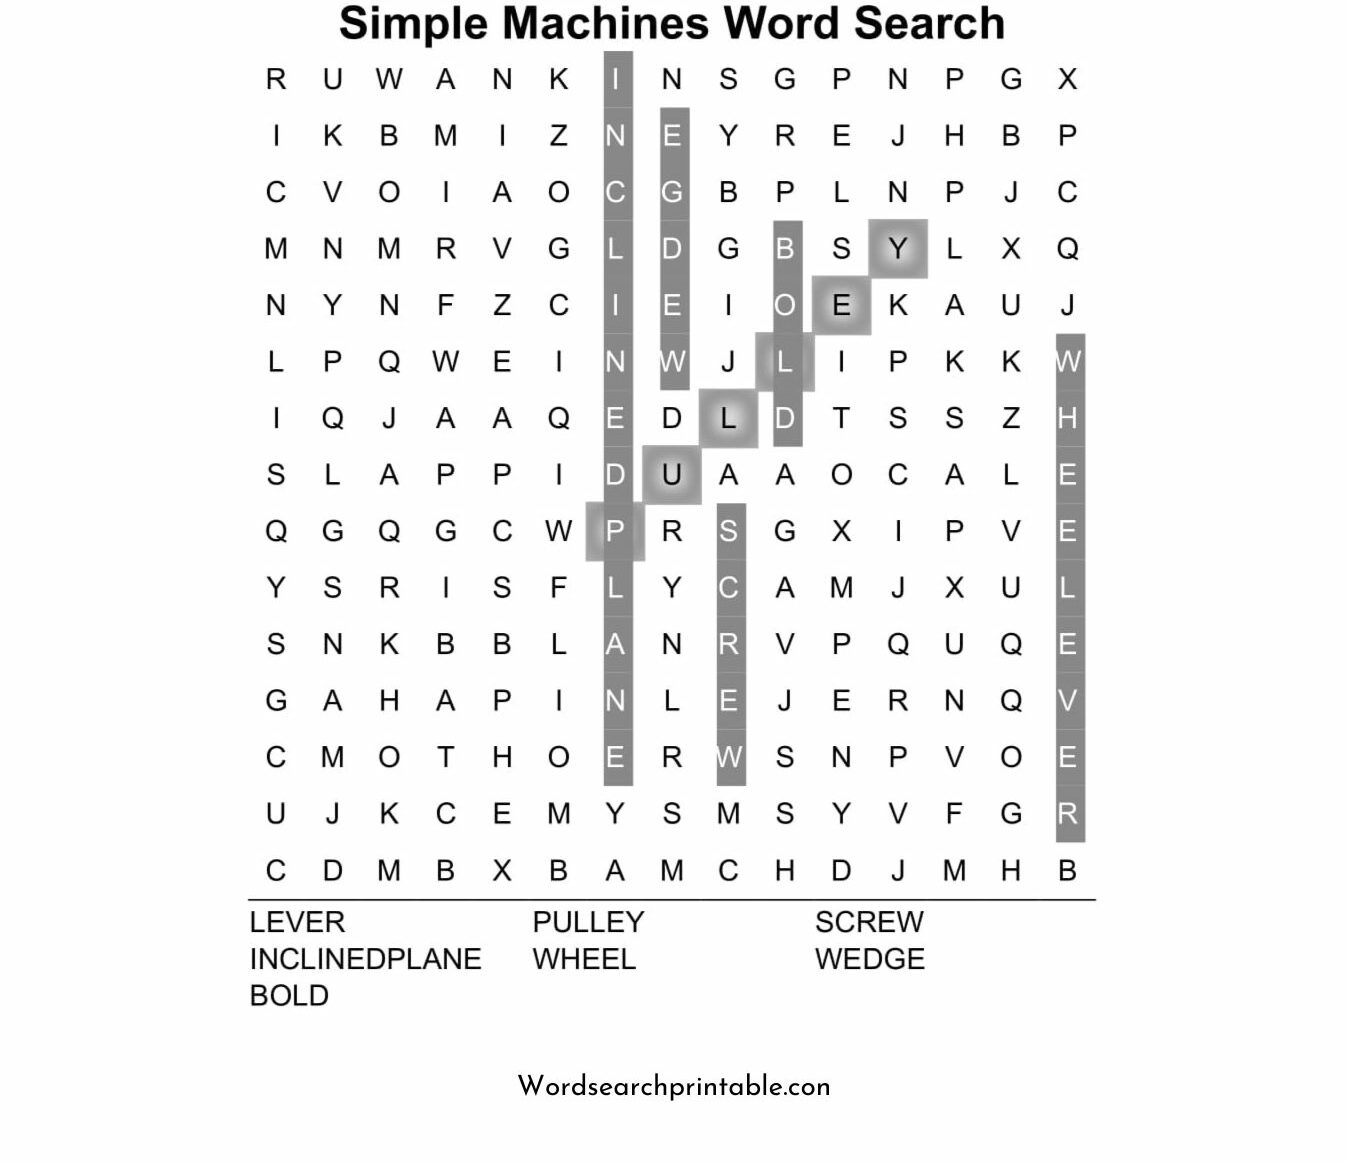 simple machines word search puzzle solution